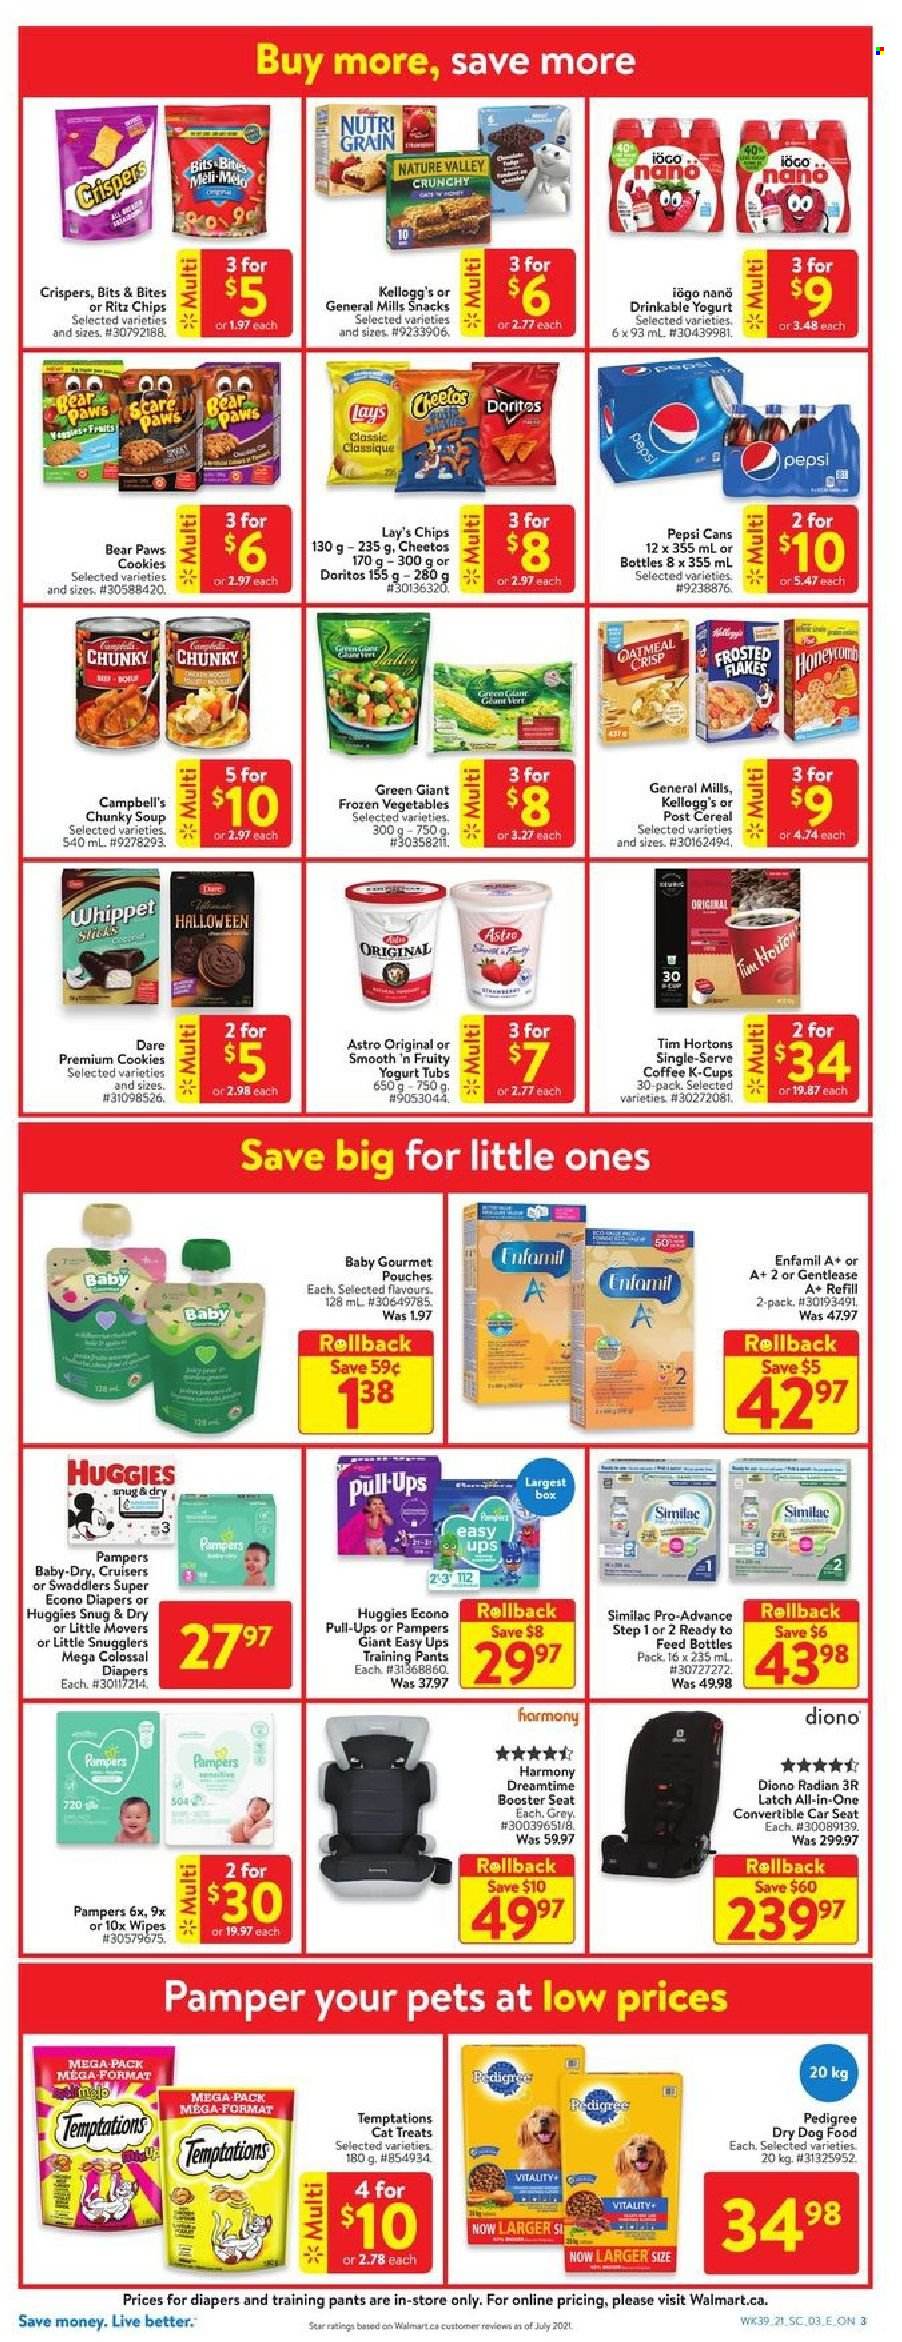 thumbnail - Walmart Flyer - October 21, 2021 - October 27, 2021 - Sales products - Campbell's, soup, yoghurt, frozen vegetables, cookies, snack, Kellogg's, RITZ, Doritos, Cheetos, Lay’s, cereals, Frosted Flakes, Nature Valley, Nutri-Grain, Pepsi, coffee, coffee capsules, K-Cups, Enfamil, Similac, wipes, pants, nappies, baby pants, Paws, animal food, dog food, Pedigree, dry dog food, Halloween, Snug, baby car seat, Huggies, Pampers. Page 7.